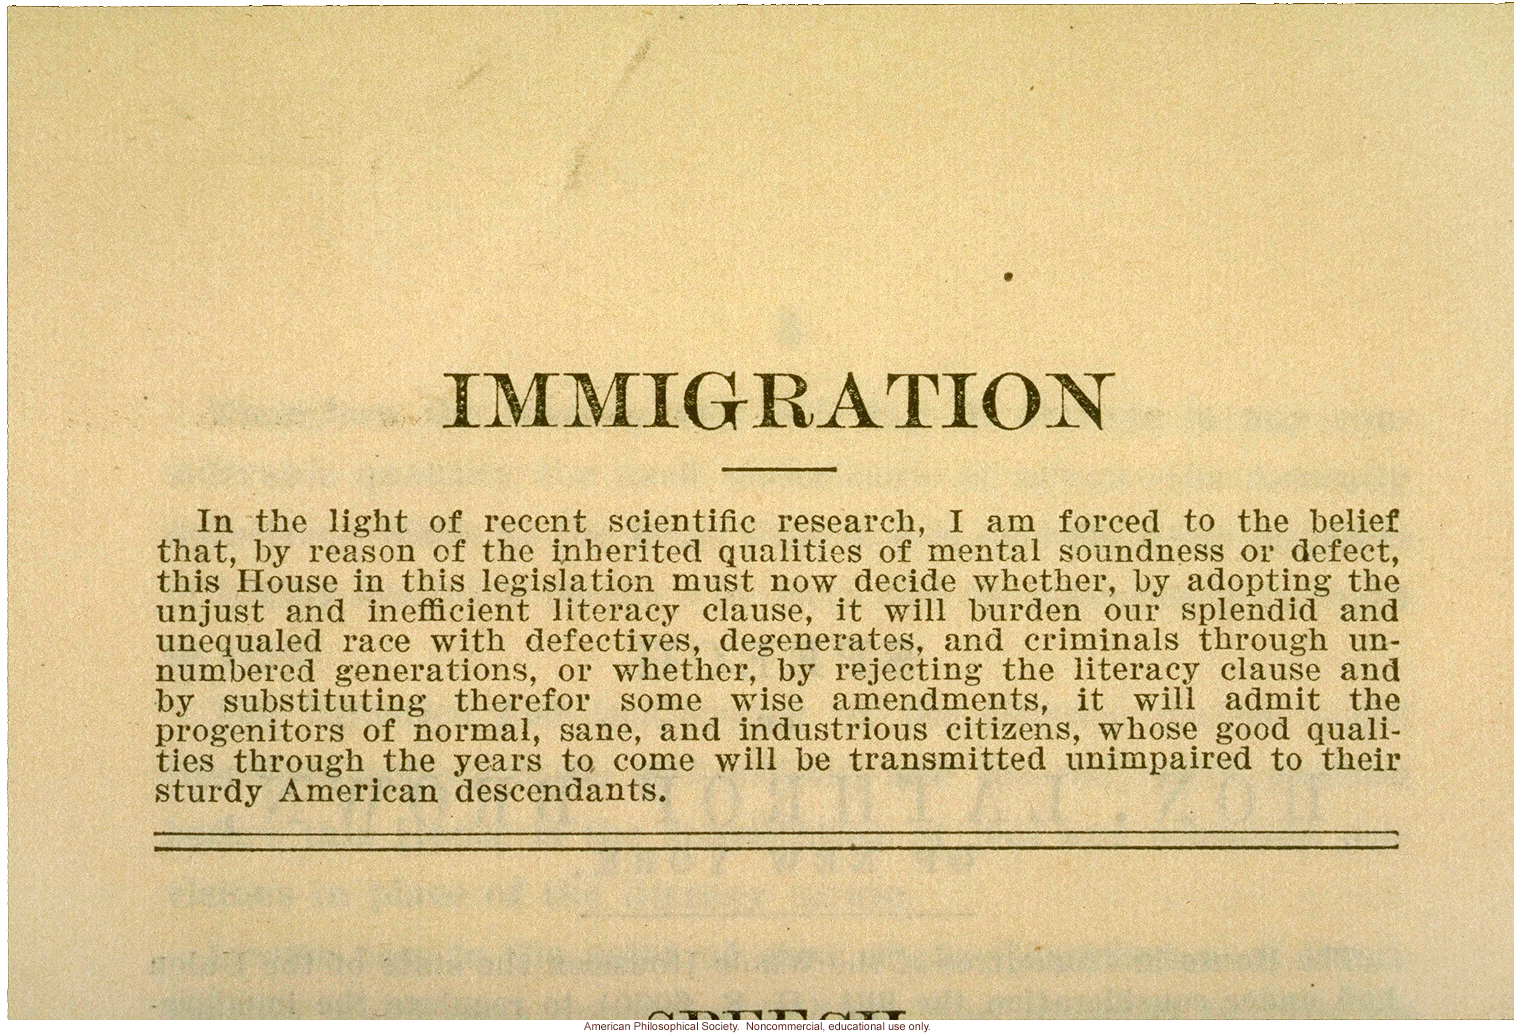 Lathrop Brown speech to House of Representatives about immigration